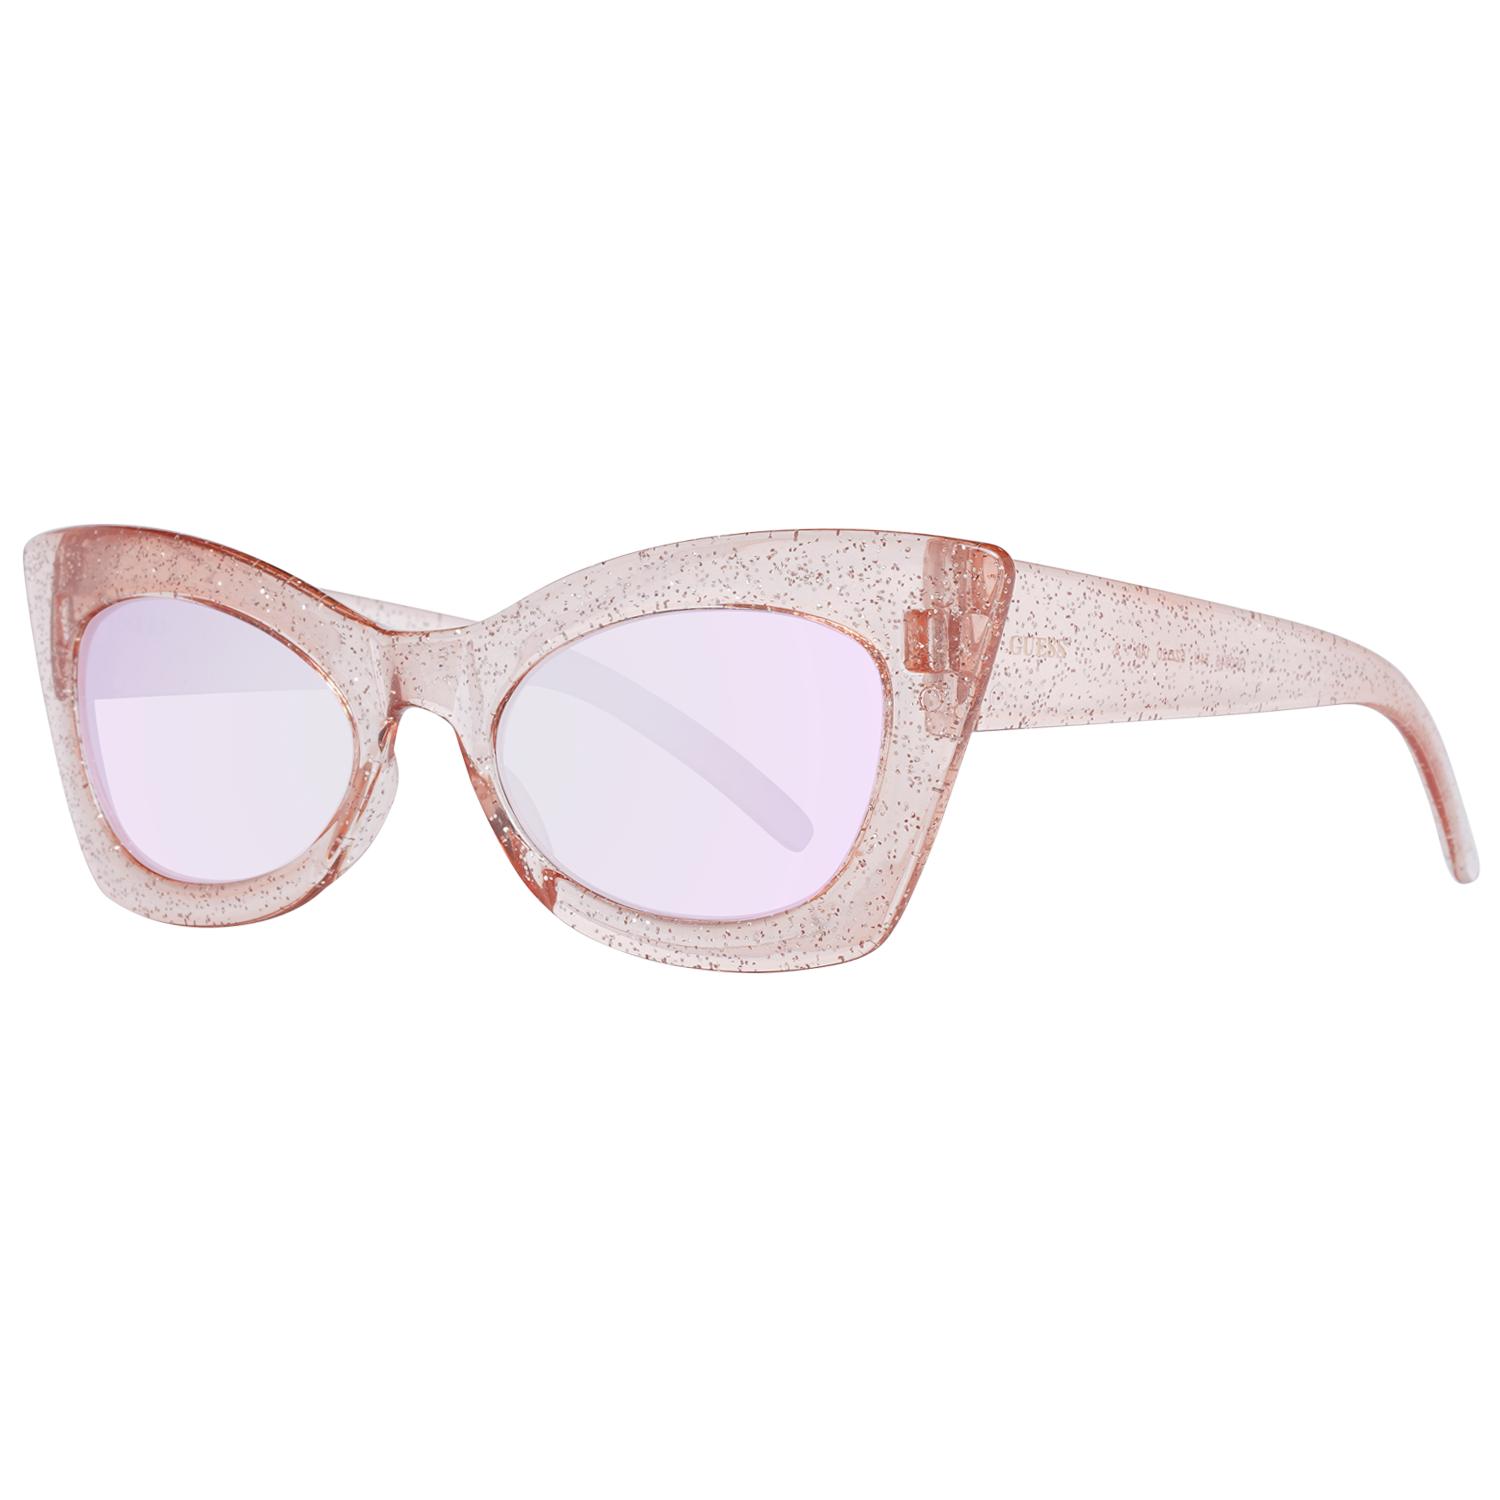 Guess Sunglasses in Pink | Lyst